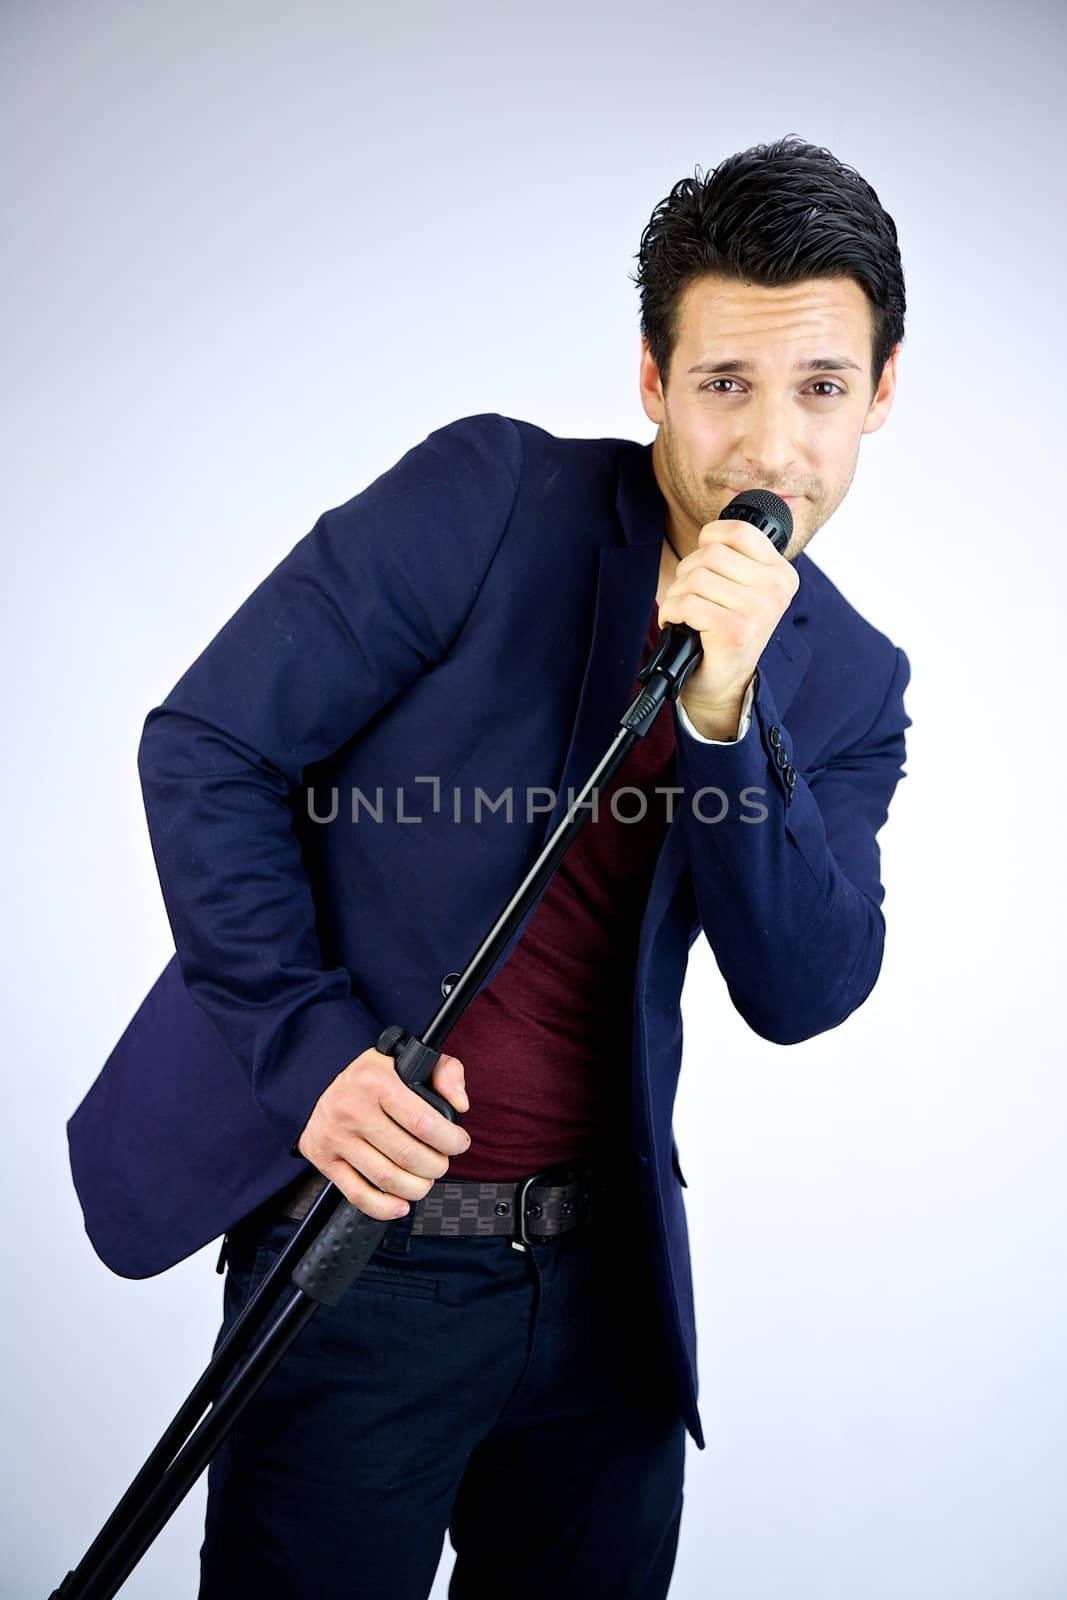 Man singing into microphone laughing by fmarsicano